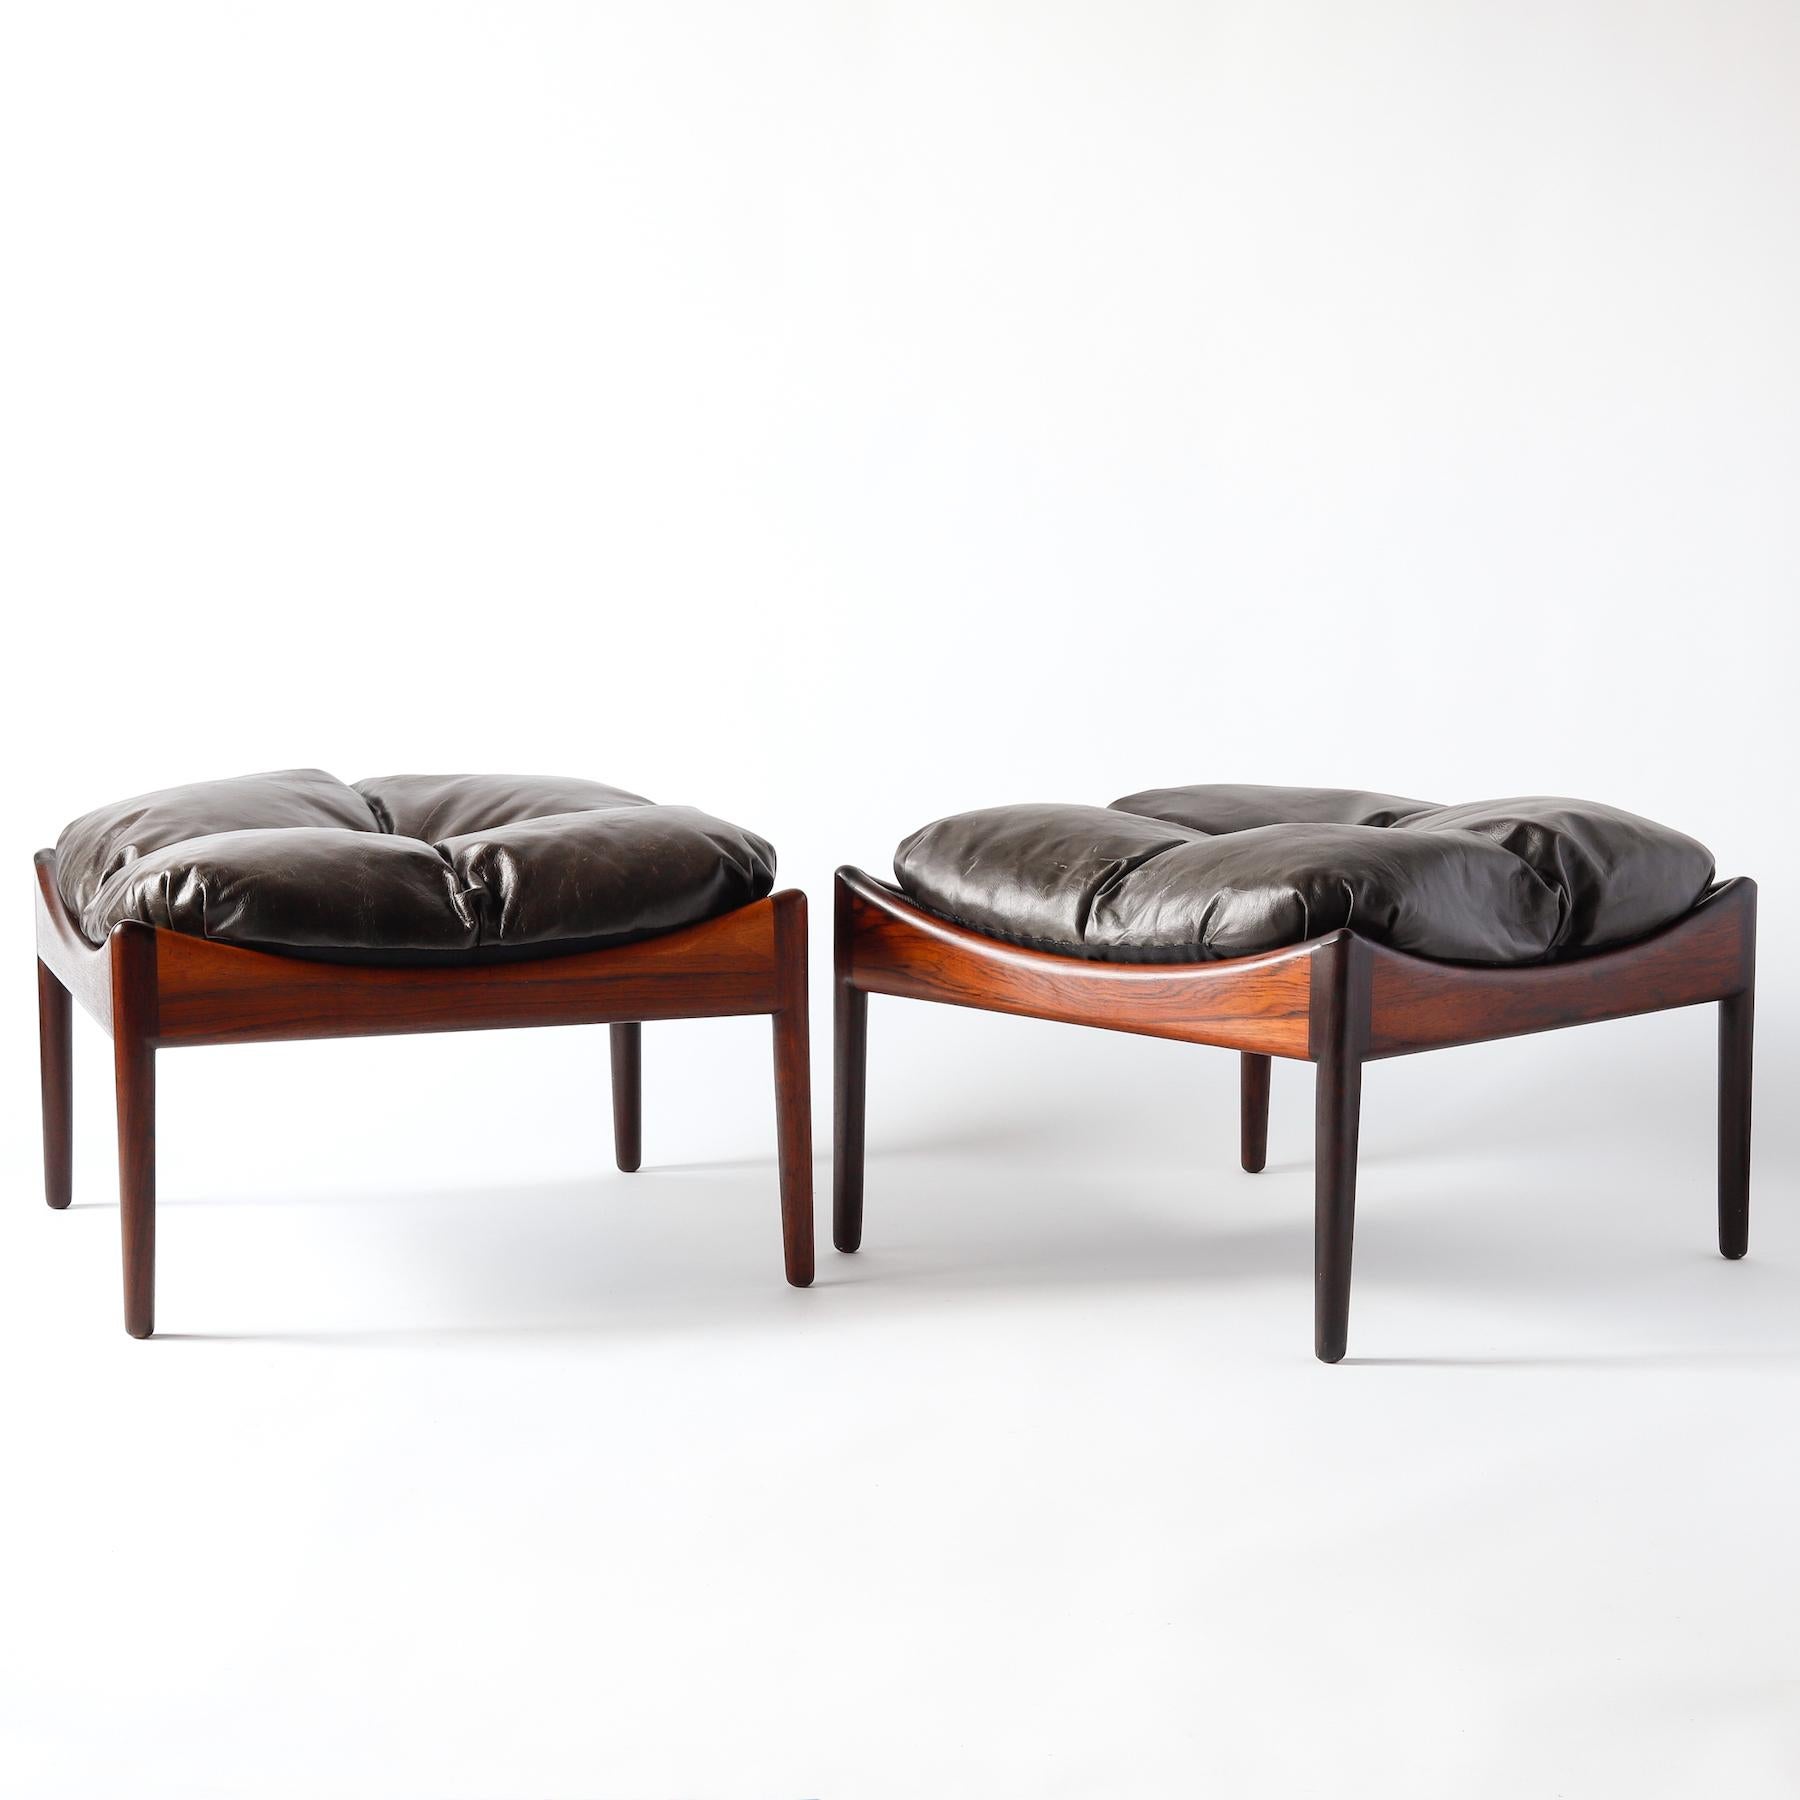 Pair of rosewood ottomans with leather cushions designed by Kristian Vedel for Soren Willadsen of Denmark. These ottomans were part of Vedel's Modus line from the 1960s, which included a lounge chair and side table that used the same rosewood frame.